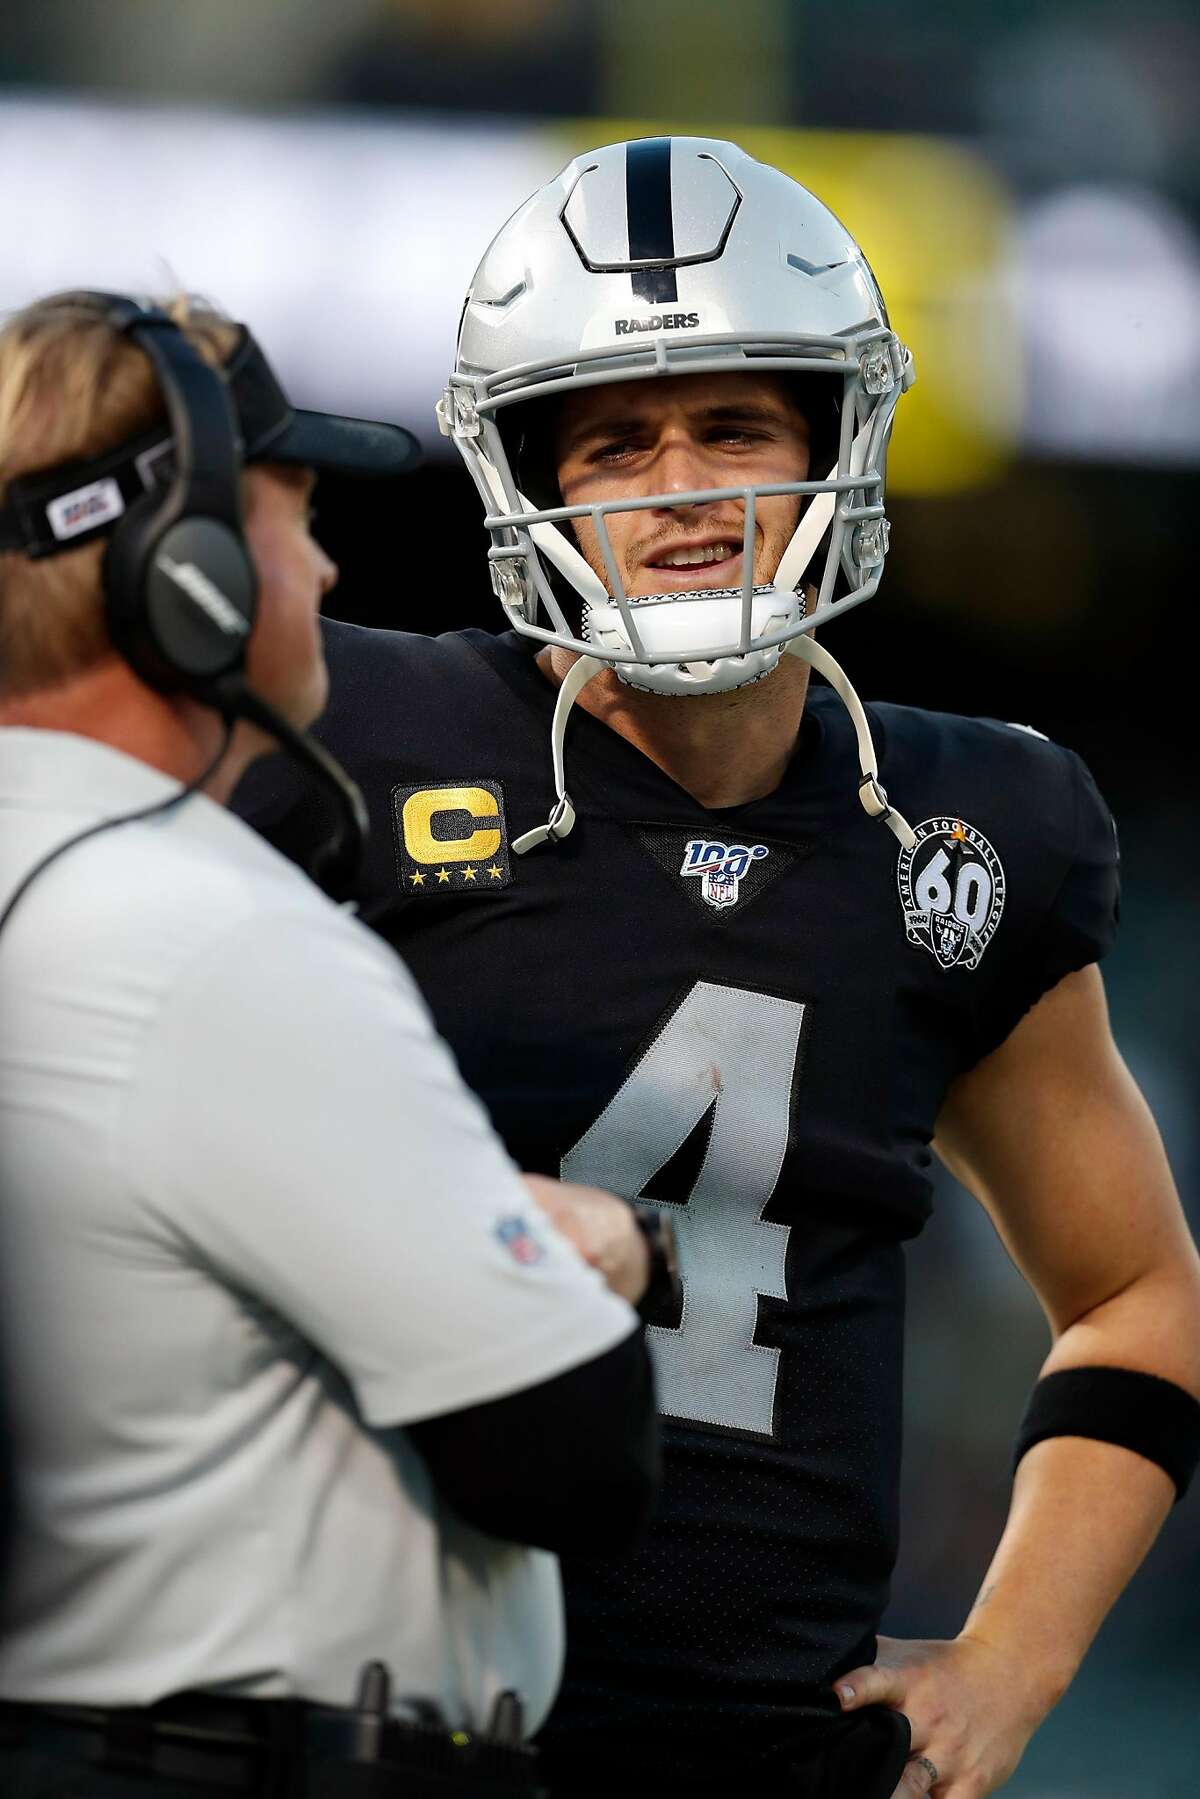 Oakland Raiders' Derek Carr and head coach Jon Gruden during 4th quarter of Raiders' 42-21 loss to Tennessee Titans in NFL game at Oakland Coliseum in Oakland, Calif., on Sunday, December 8, 2019.